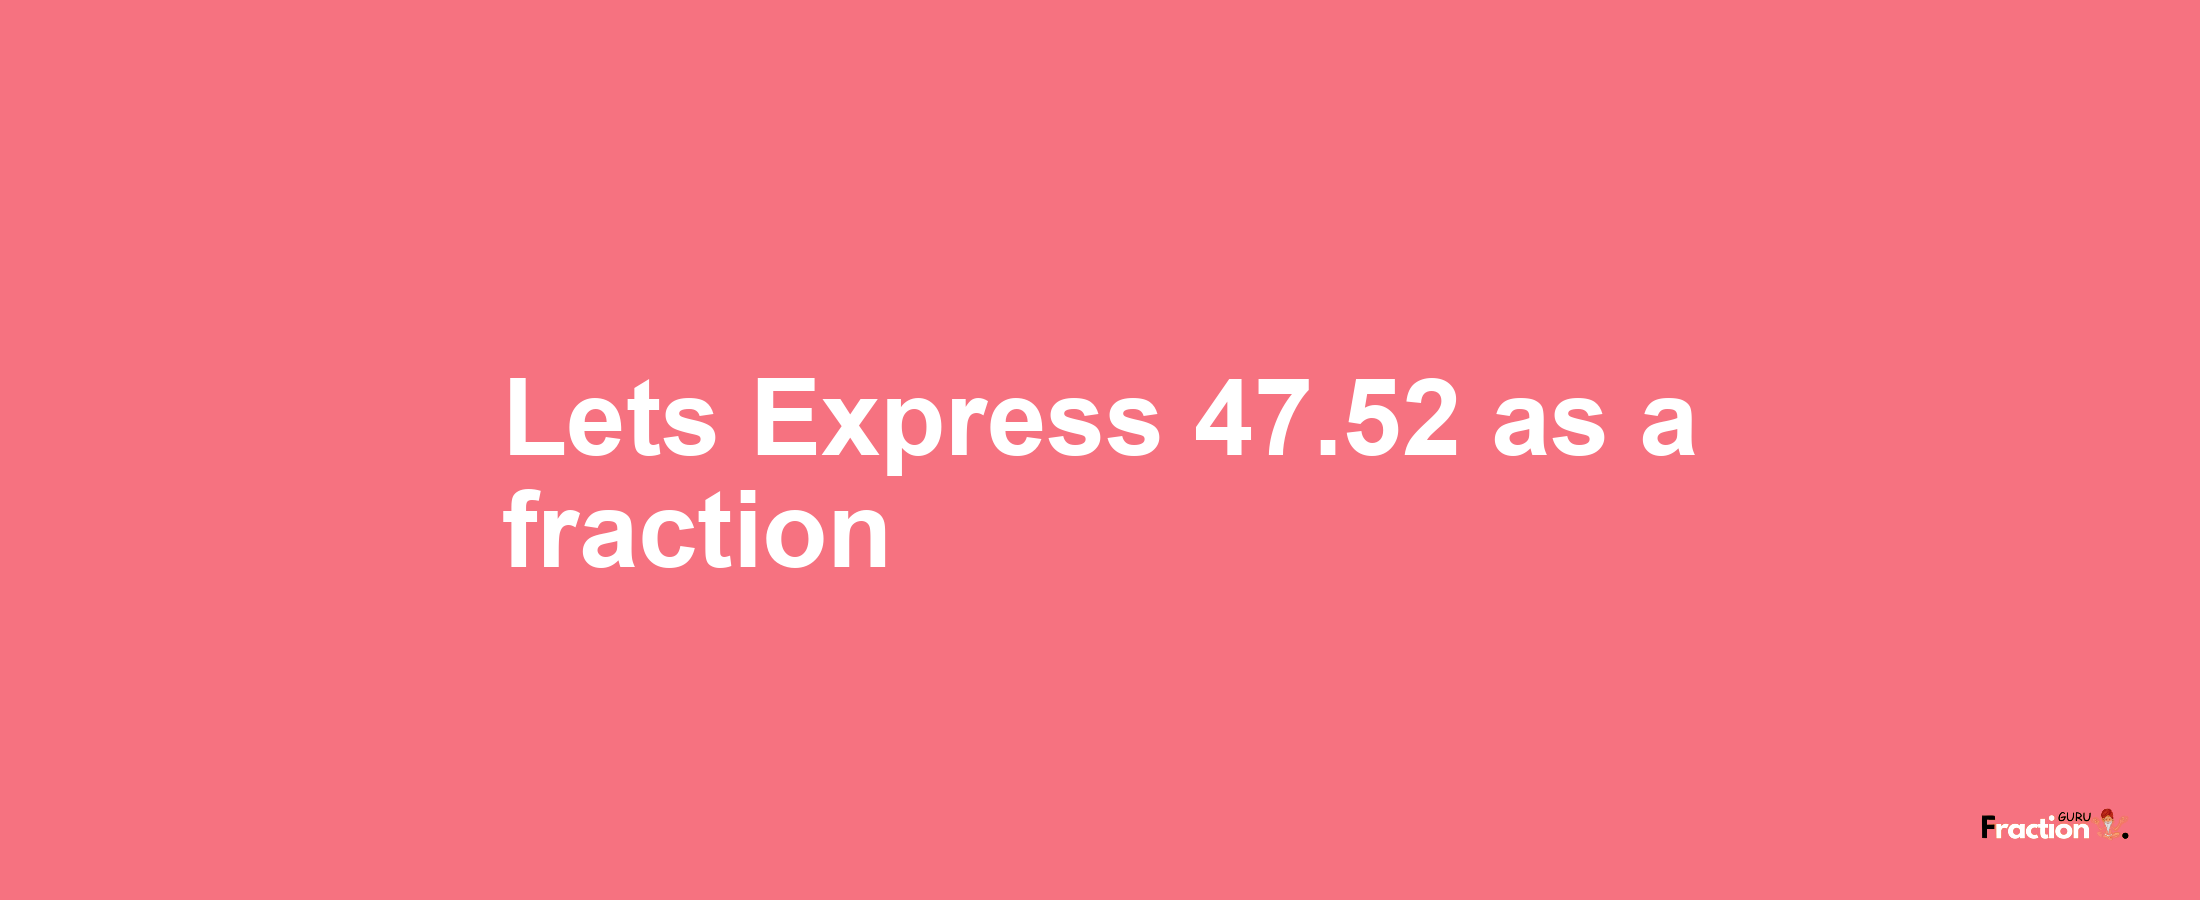 Lets Express 47.52 as afraction